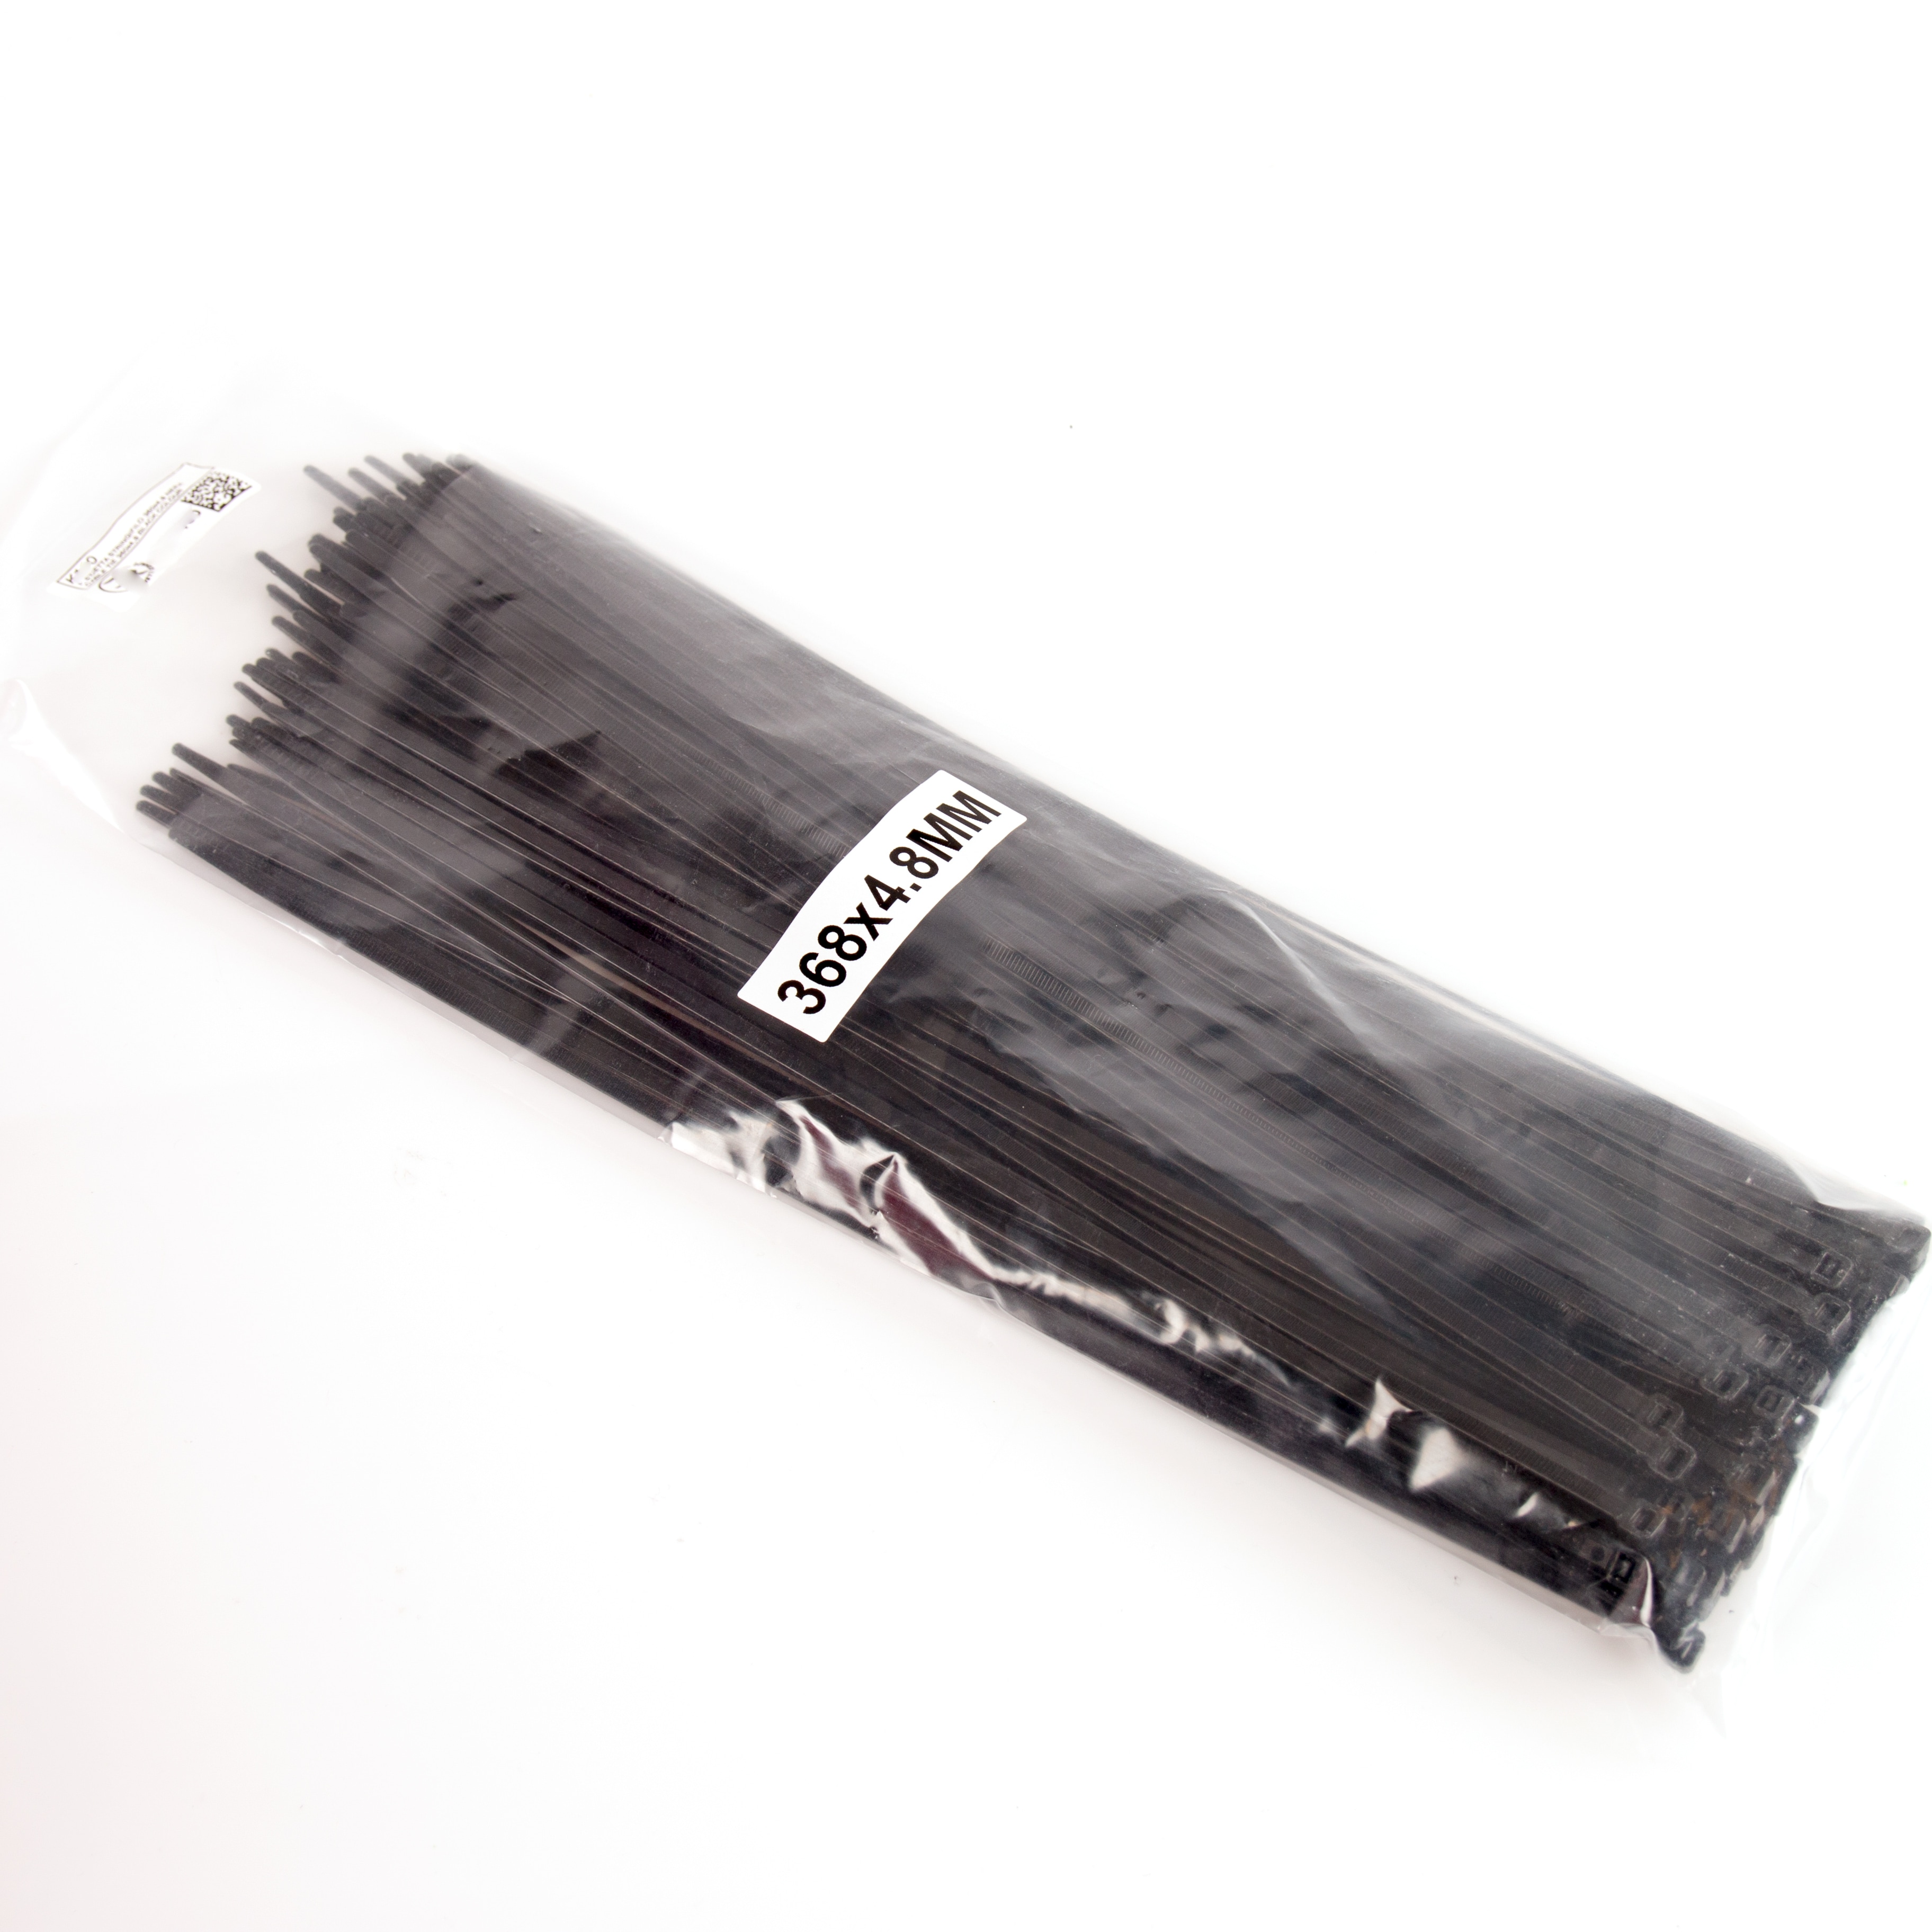 Cable Ties 368x4,8 100 pc Black